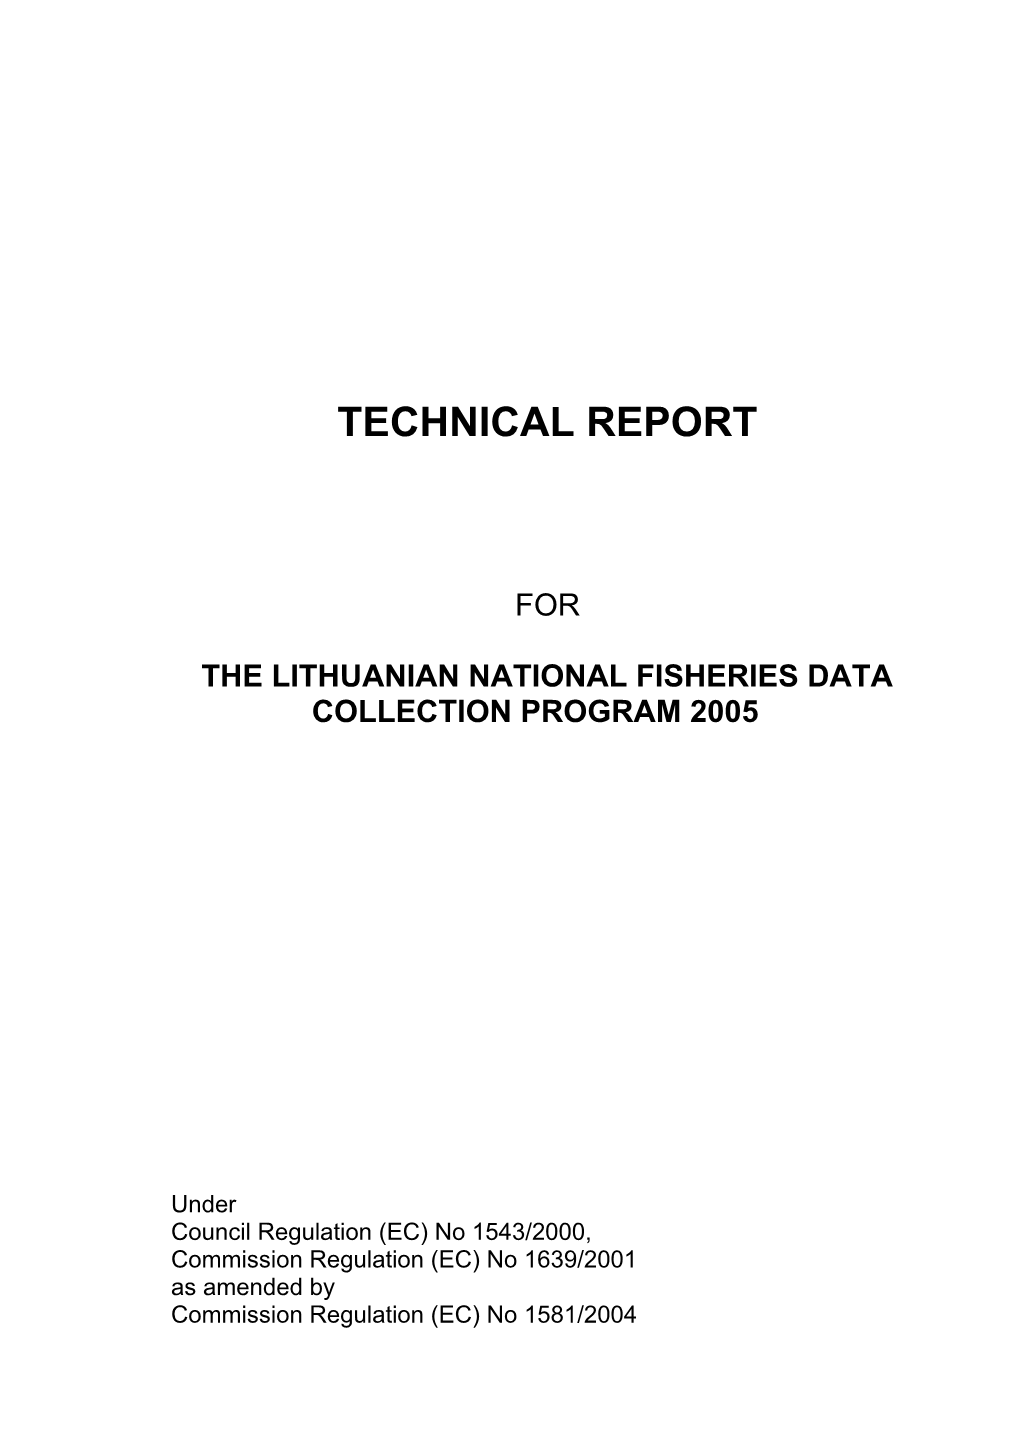 The Lithuanian National Fisheries Data Collection Program2005